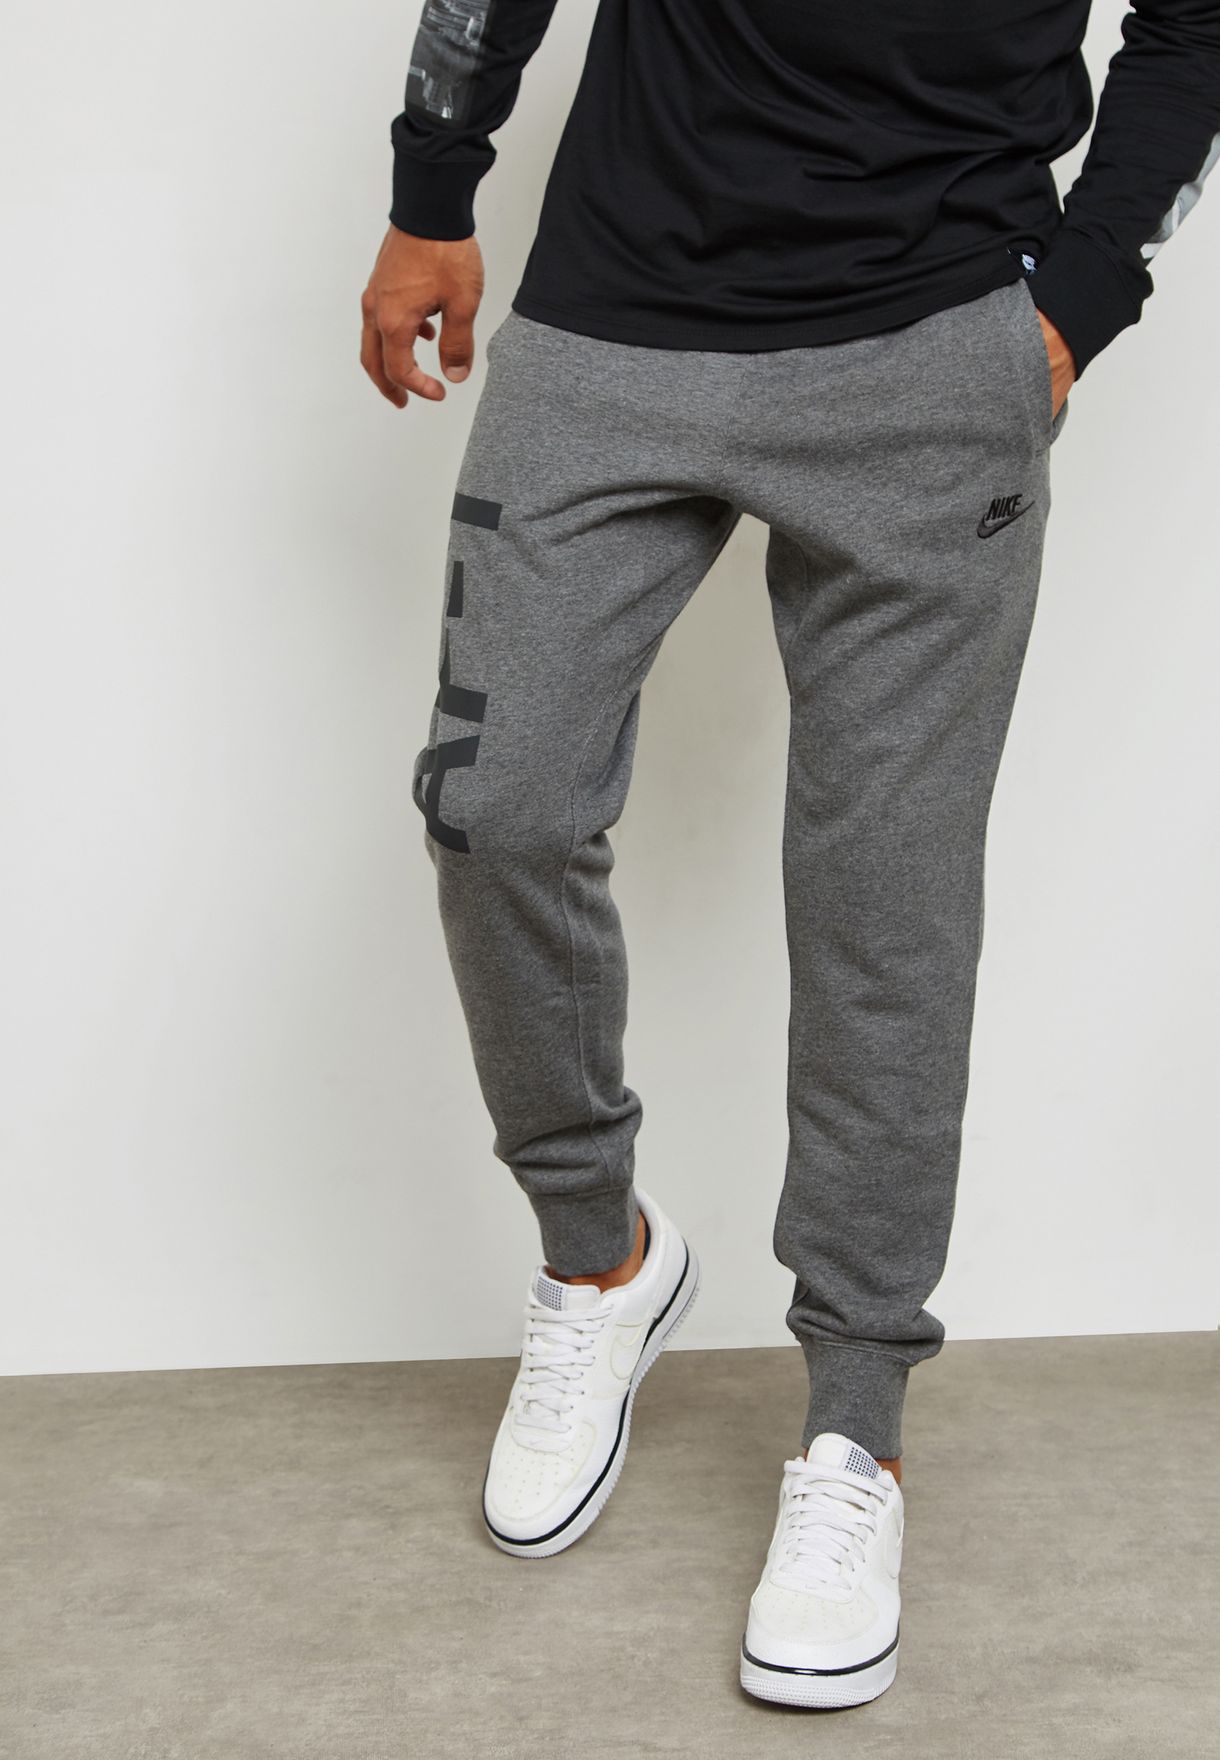 grey joggers with af1s